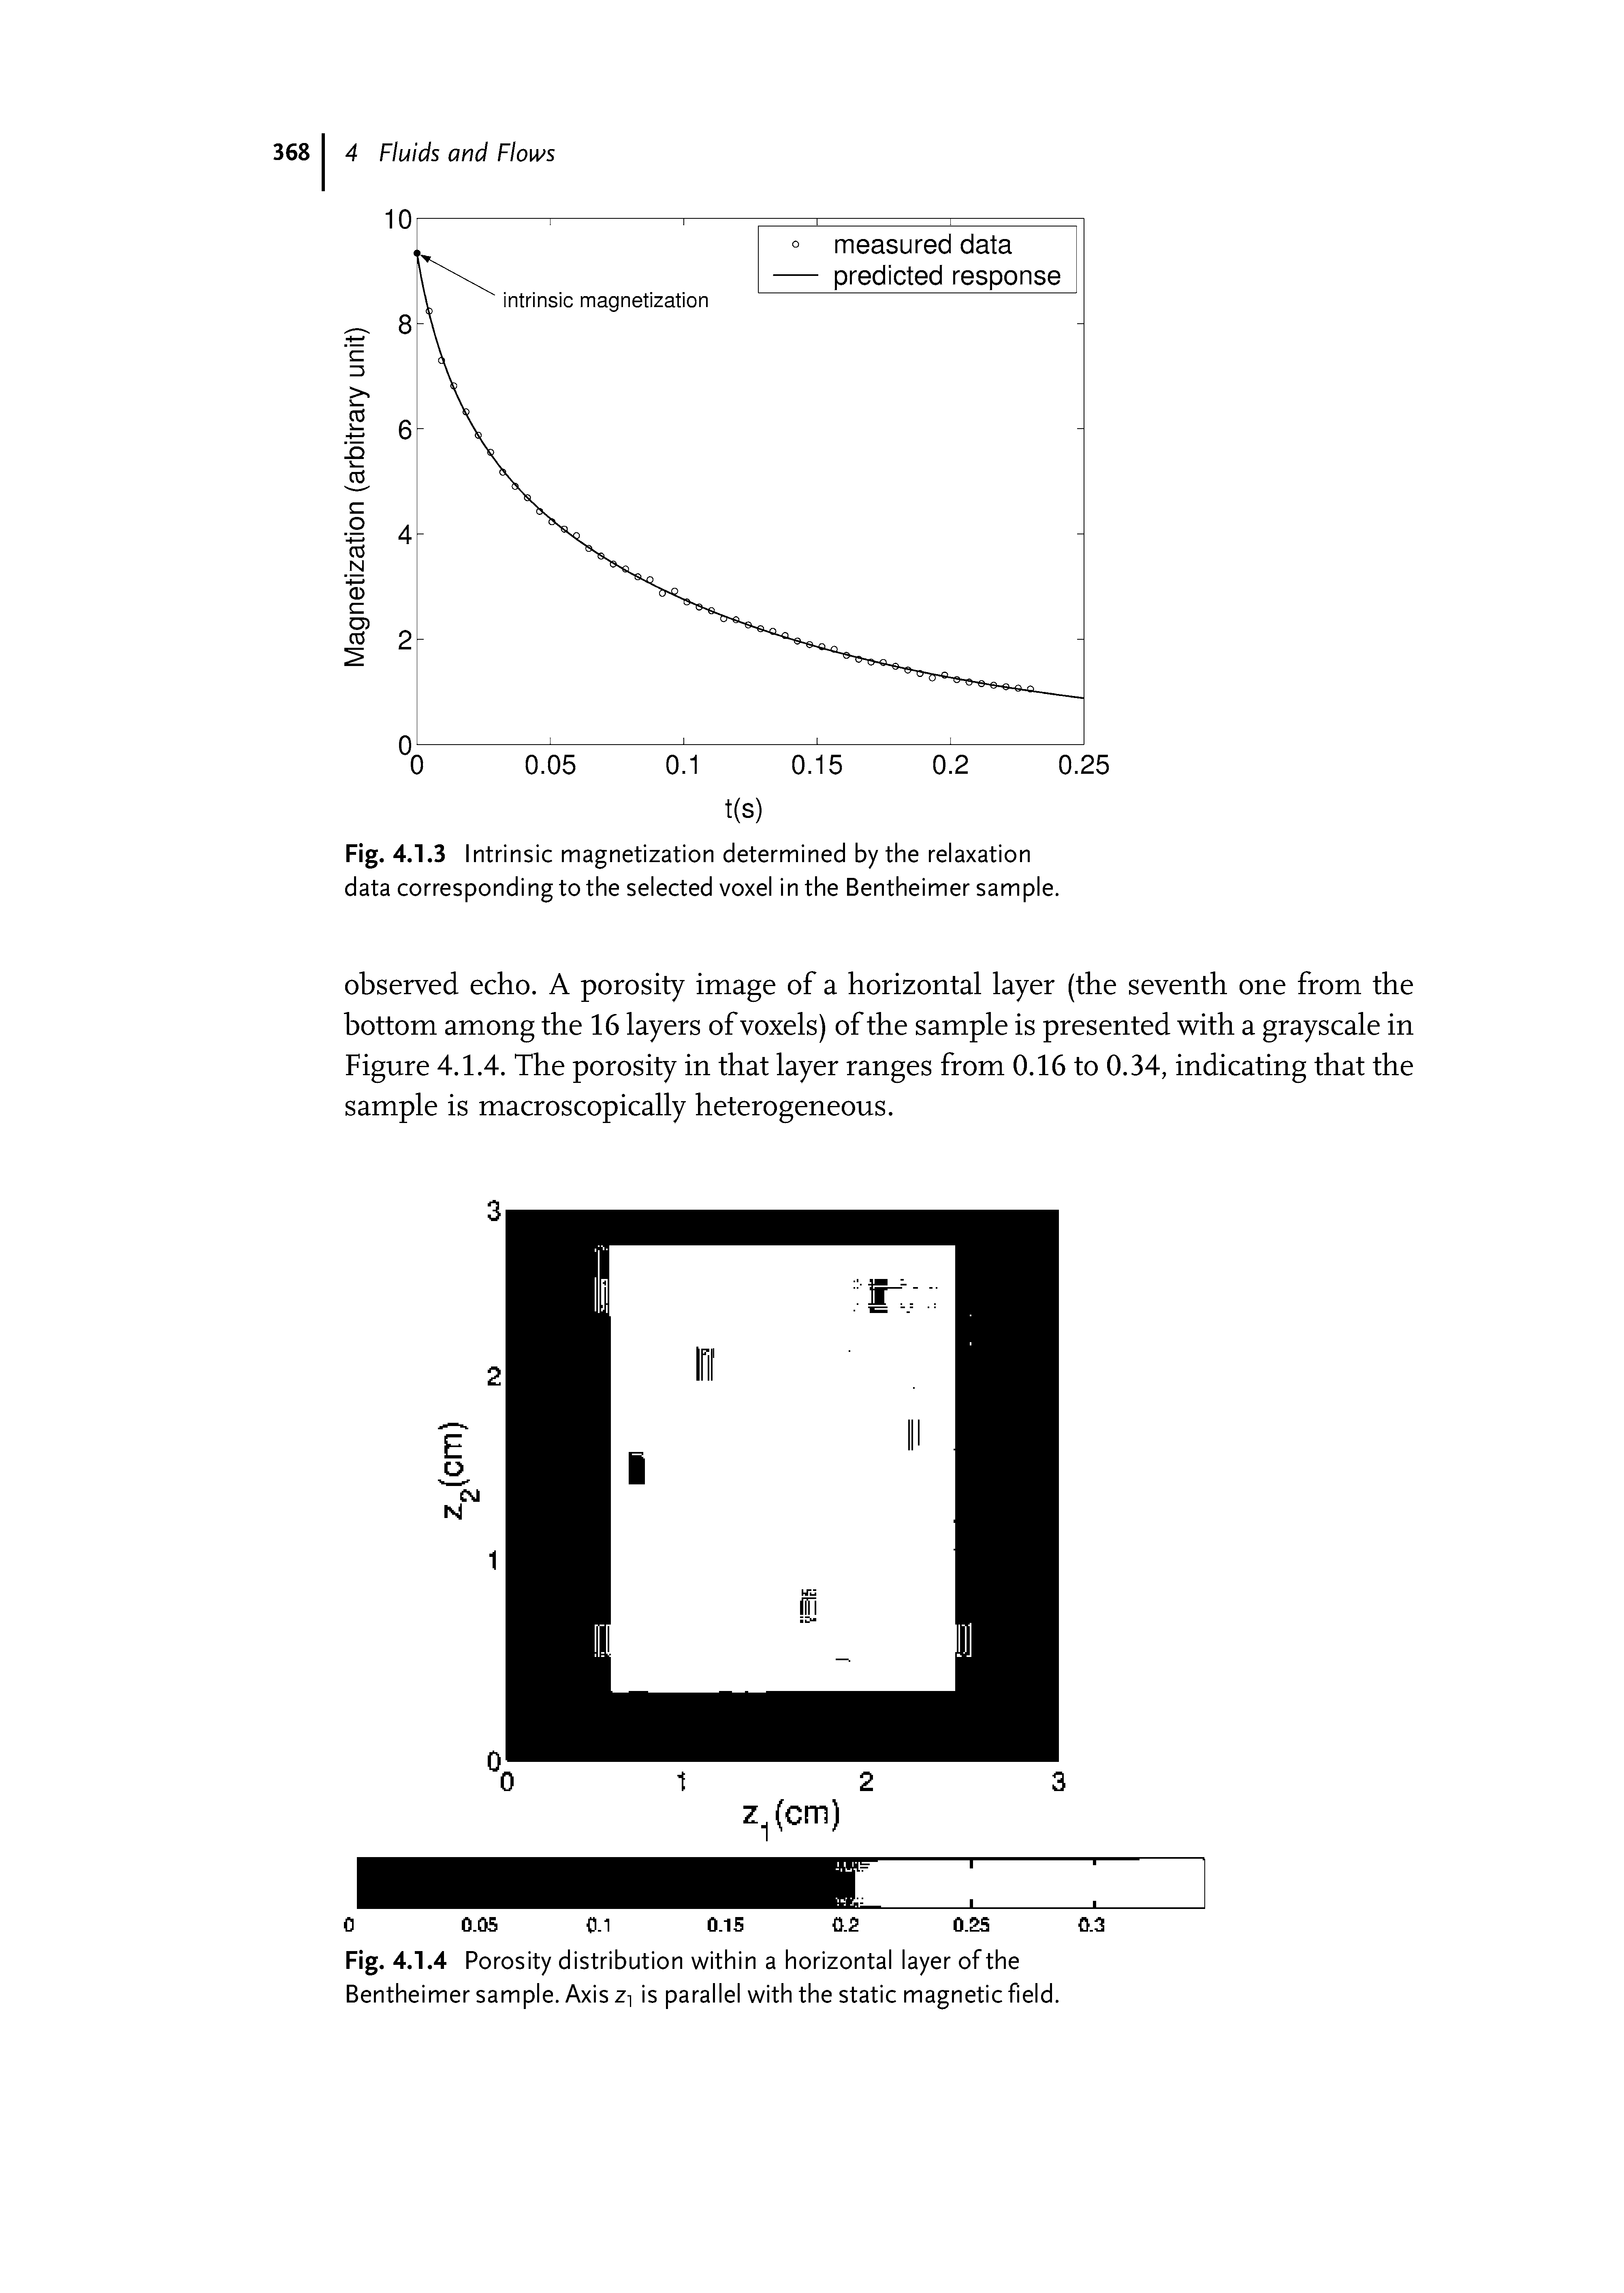 Fig. 4.1.4 Porosity distribution within a horizontal layer of the Bentheimer sample. Axis z- is parallel with the static magnetic field.